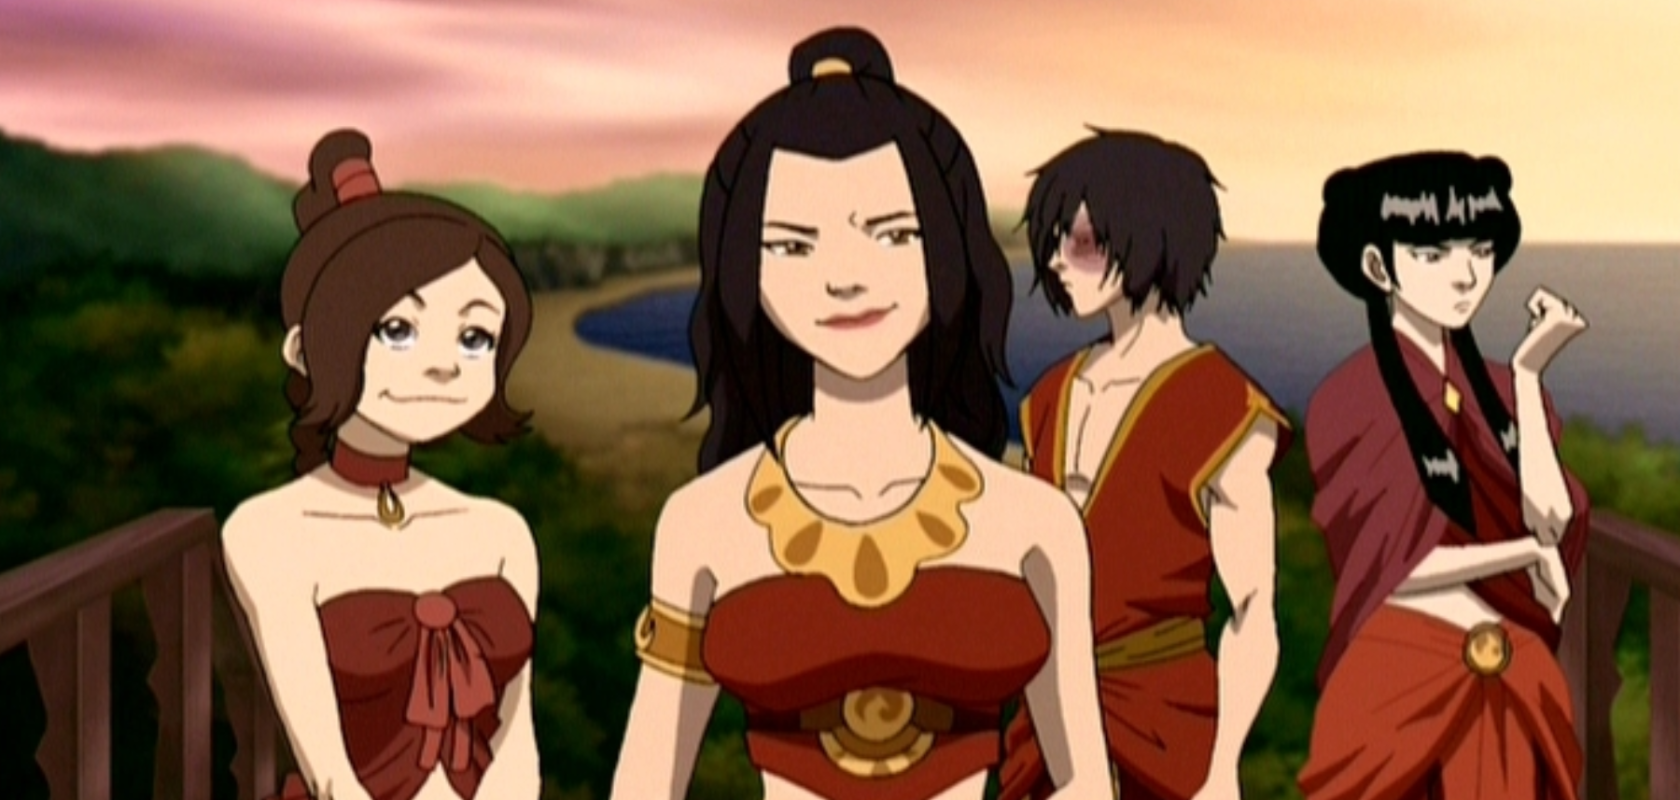 10 of 'Avatar the Last Airbender's' Best Episodes | Arc UNSW Student Life